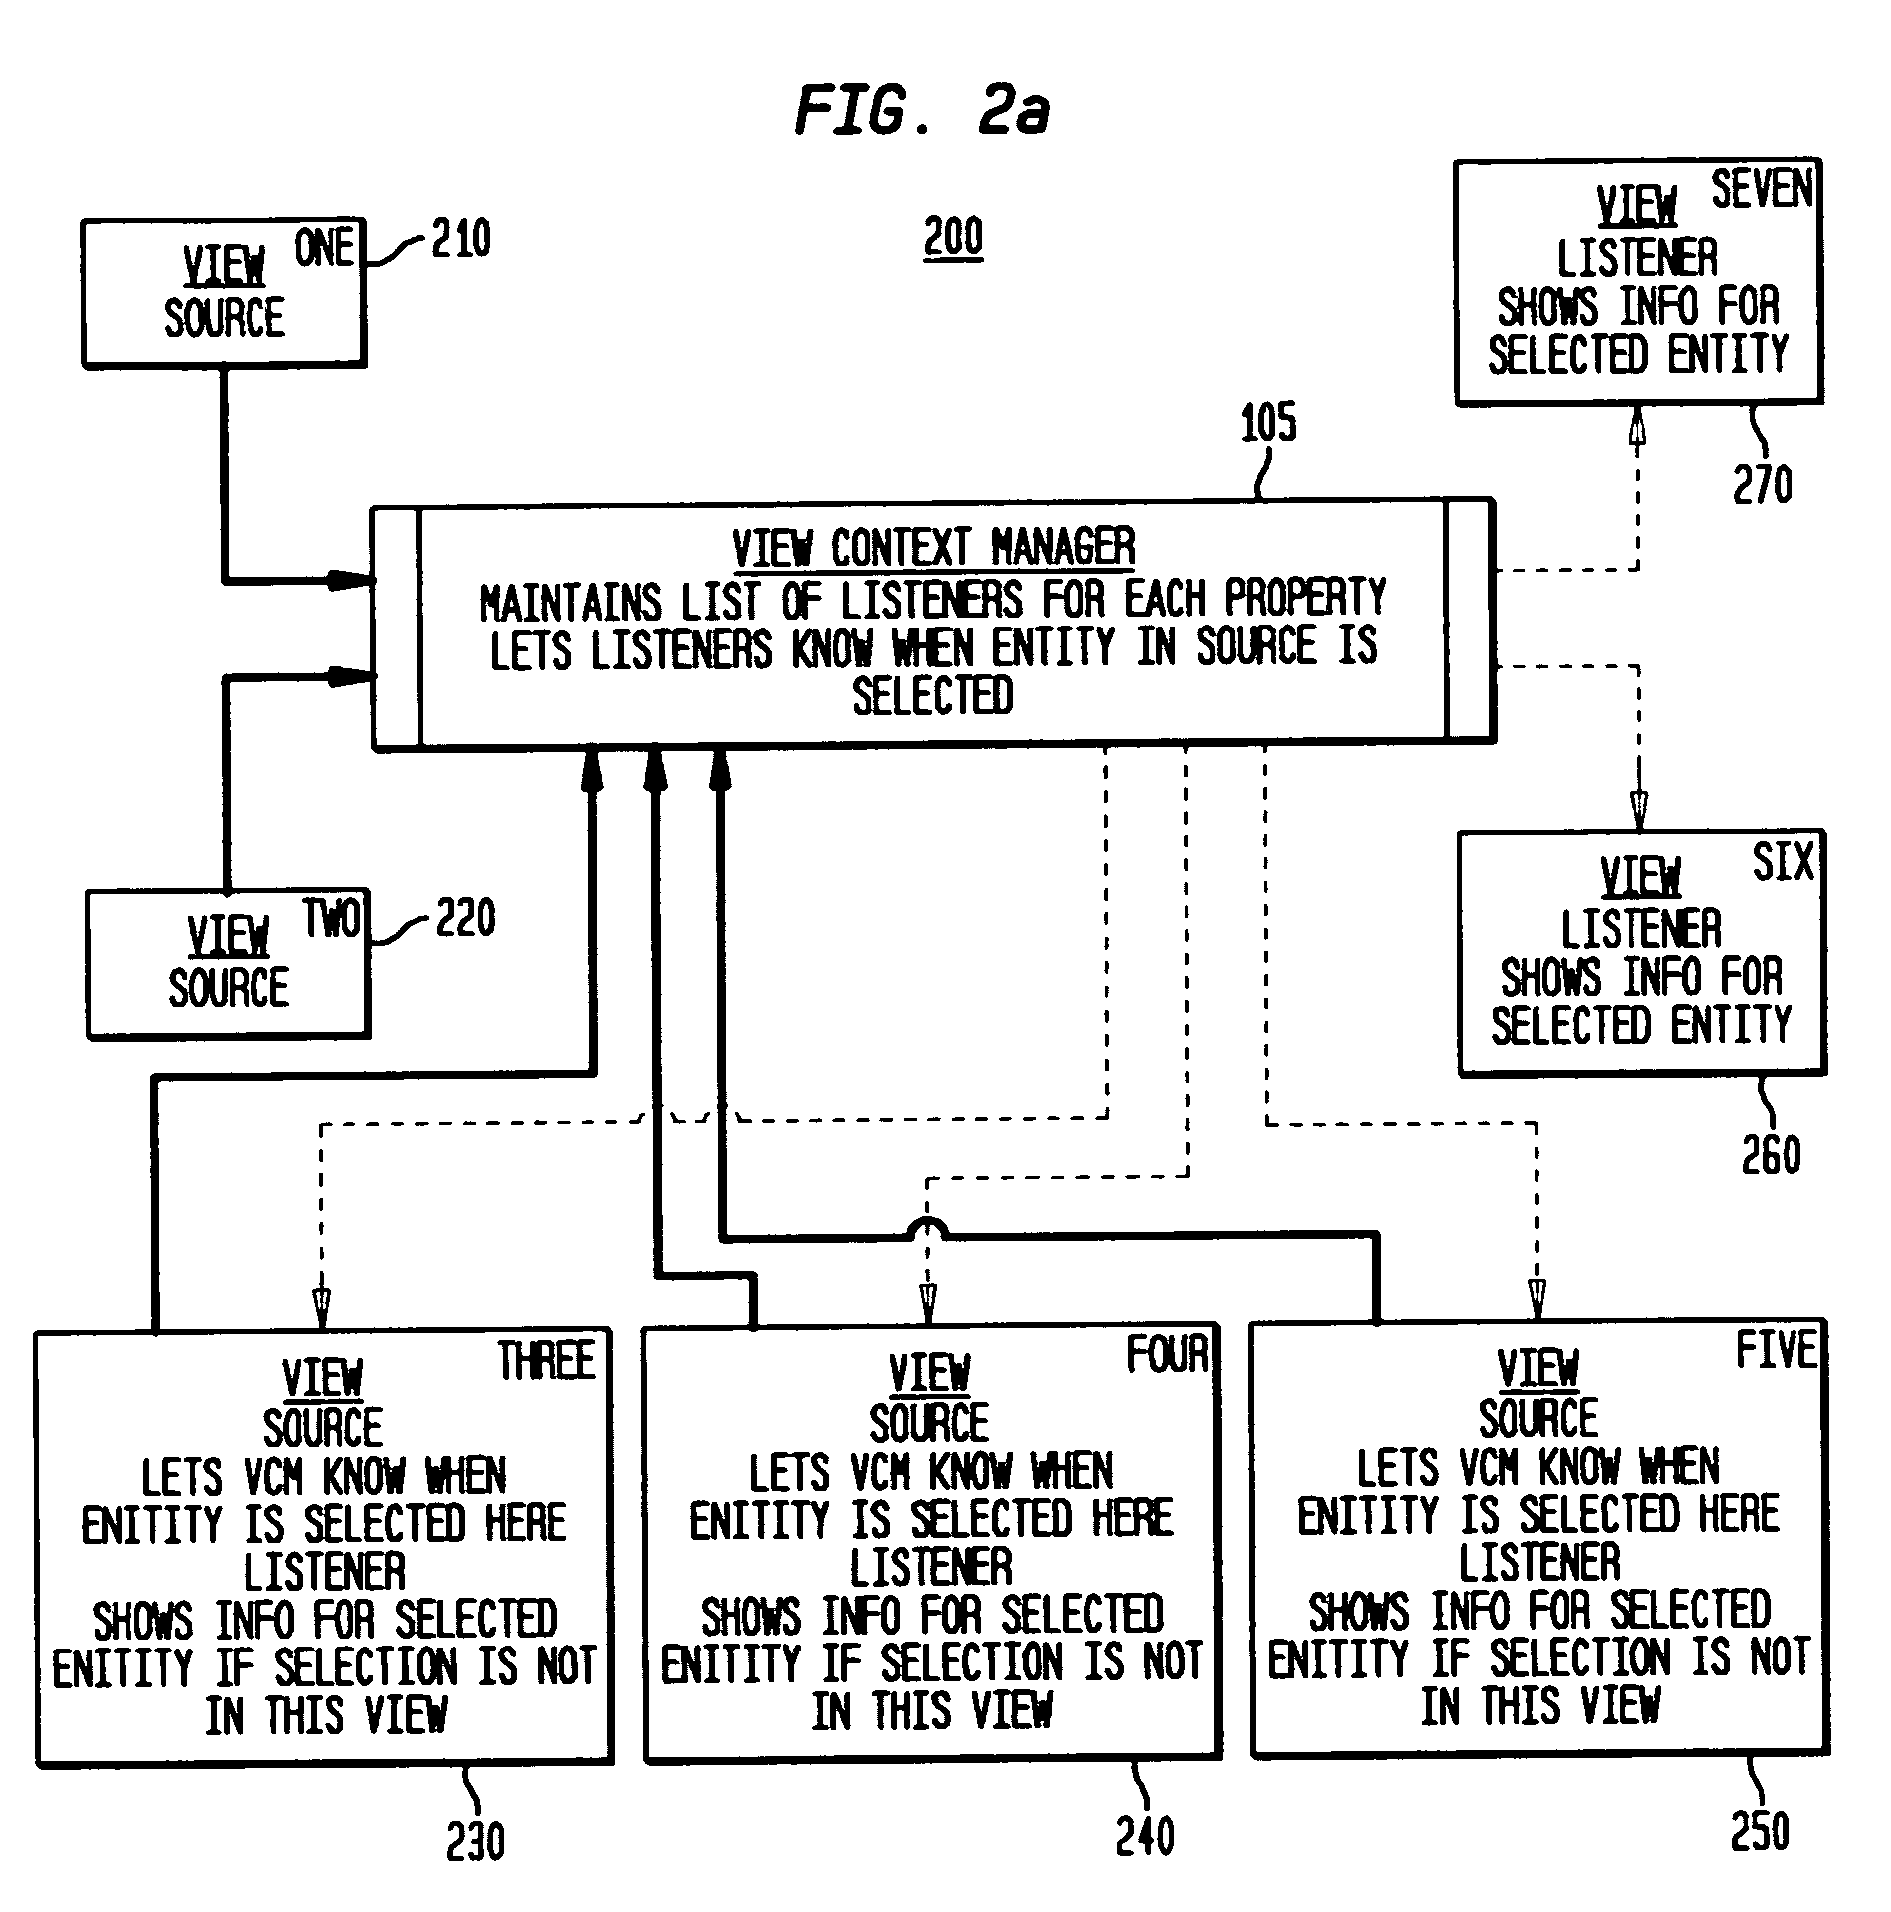 Method and system for sharing and managing context information